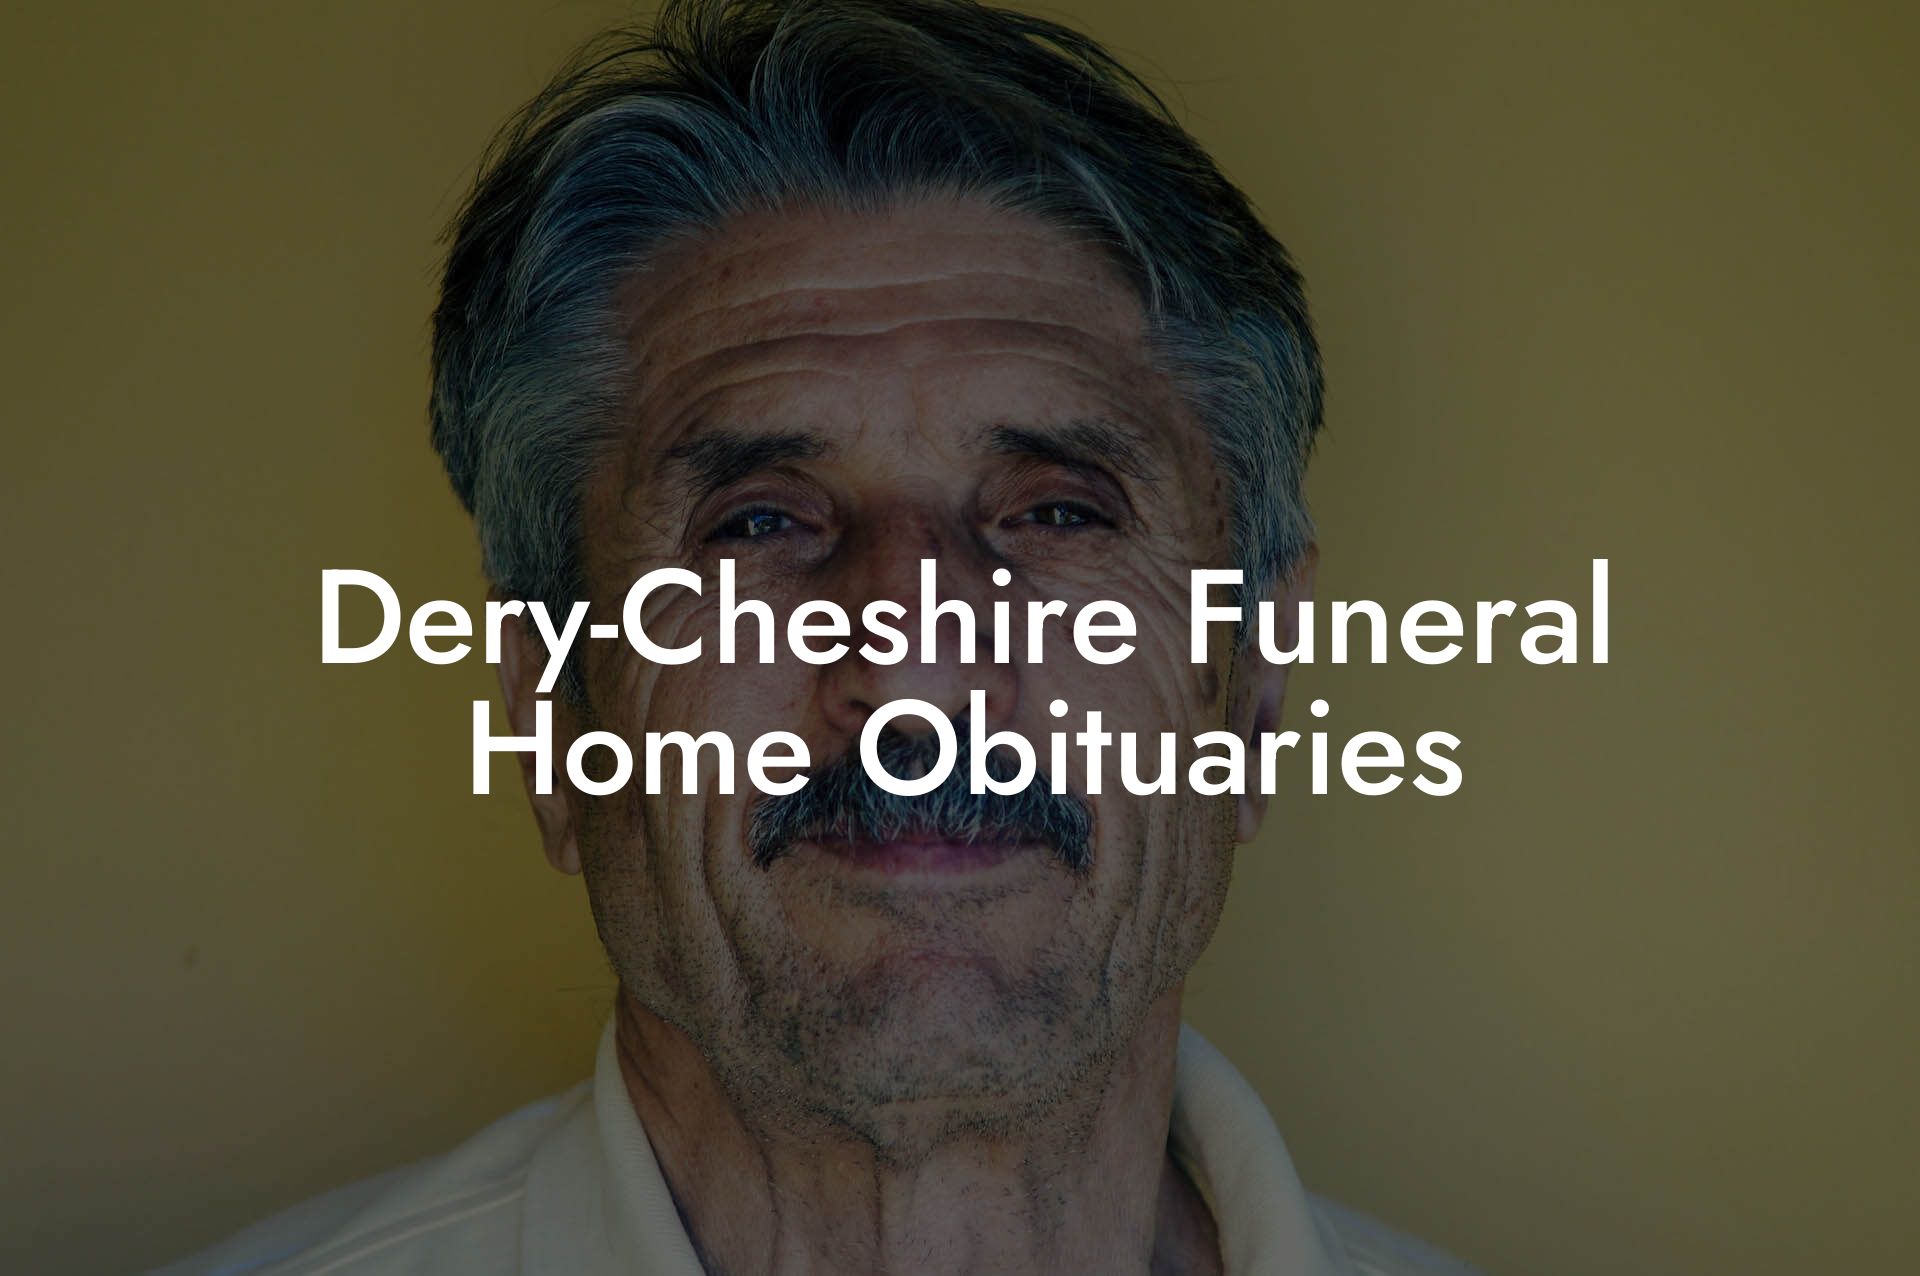 Dery-Cheshire Funeral Home Obituaries